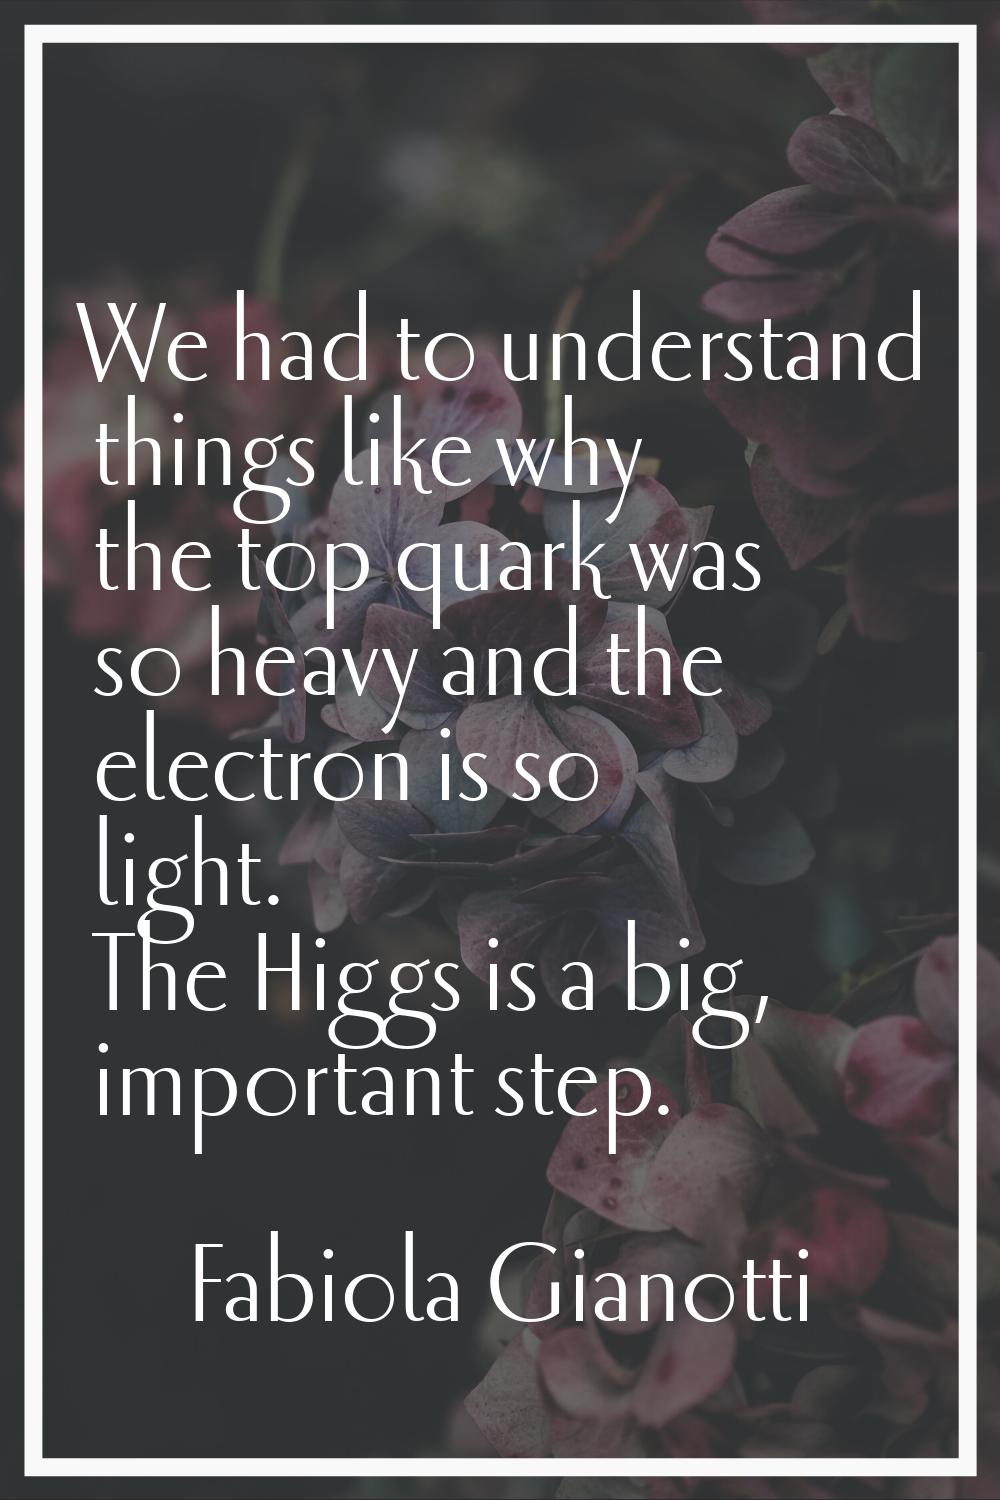 We had to understand things like why the top quark was so heavy and the electron is so light. The H